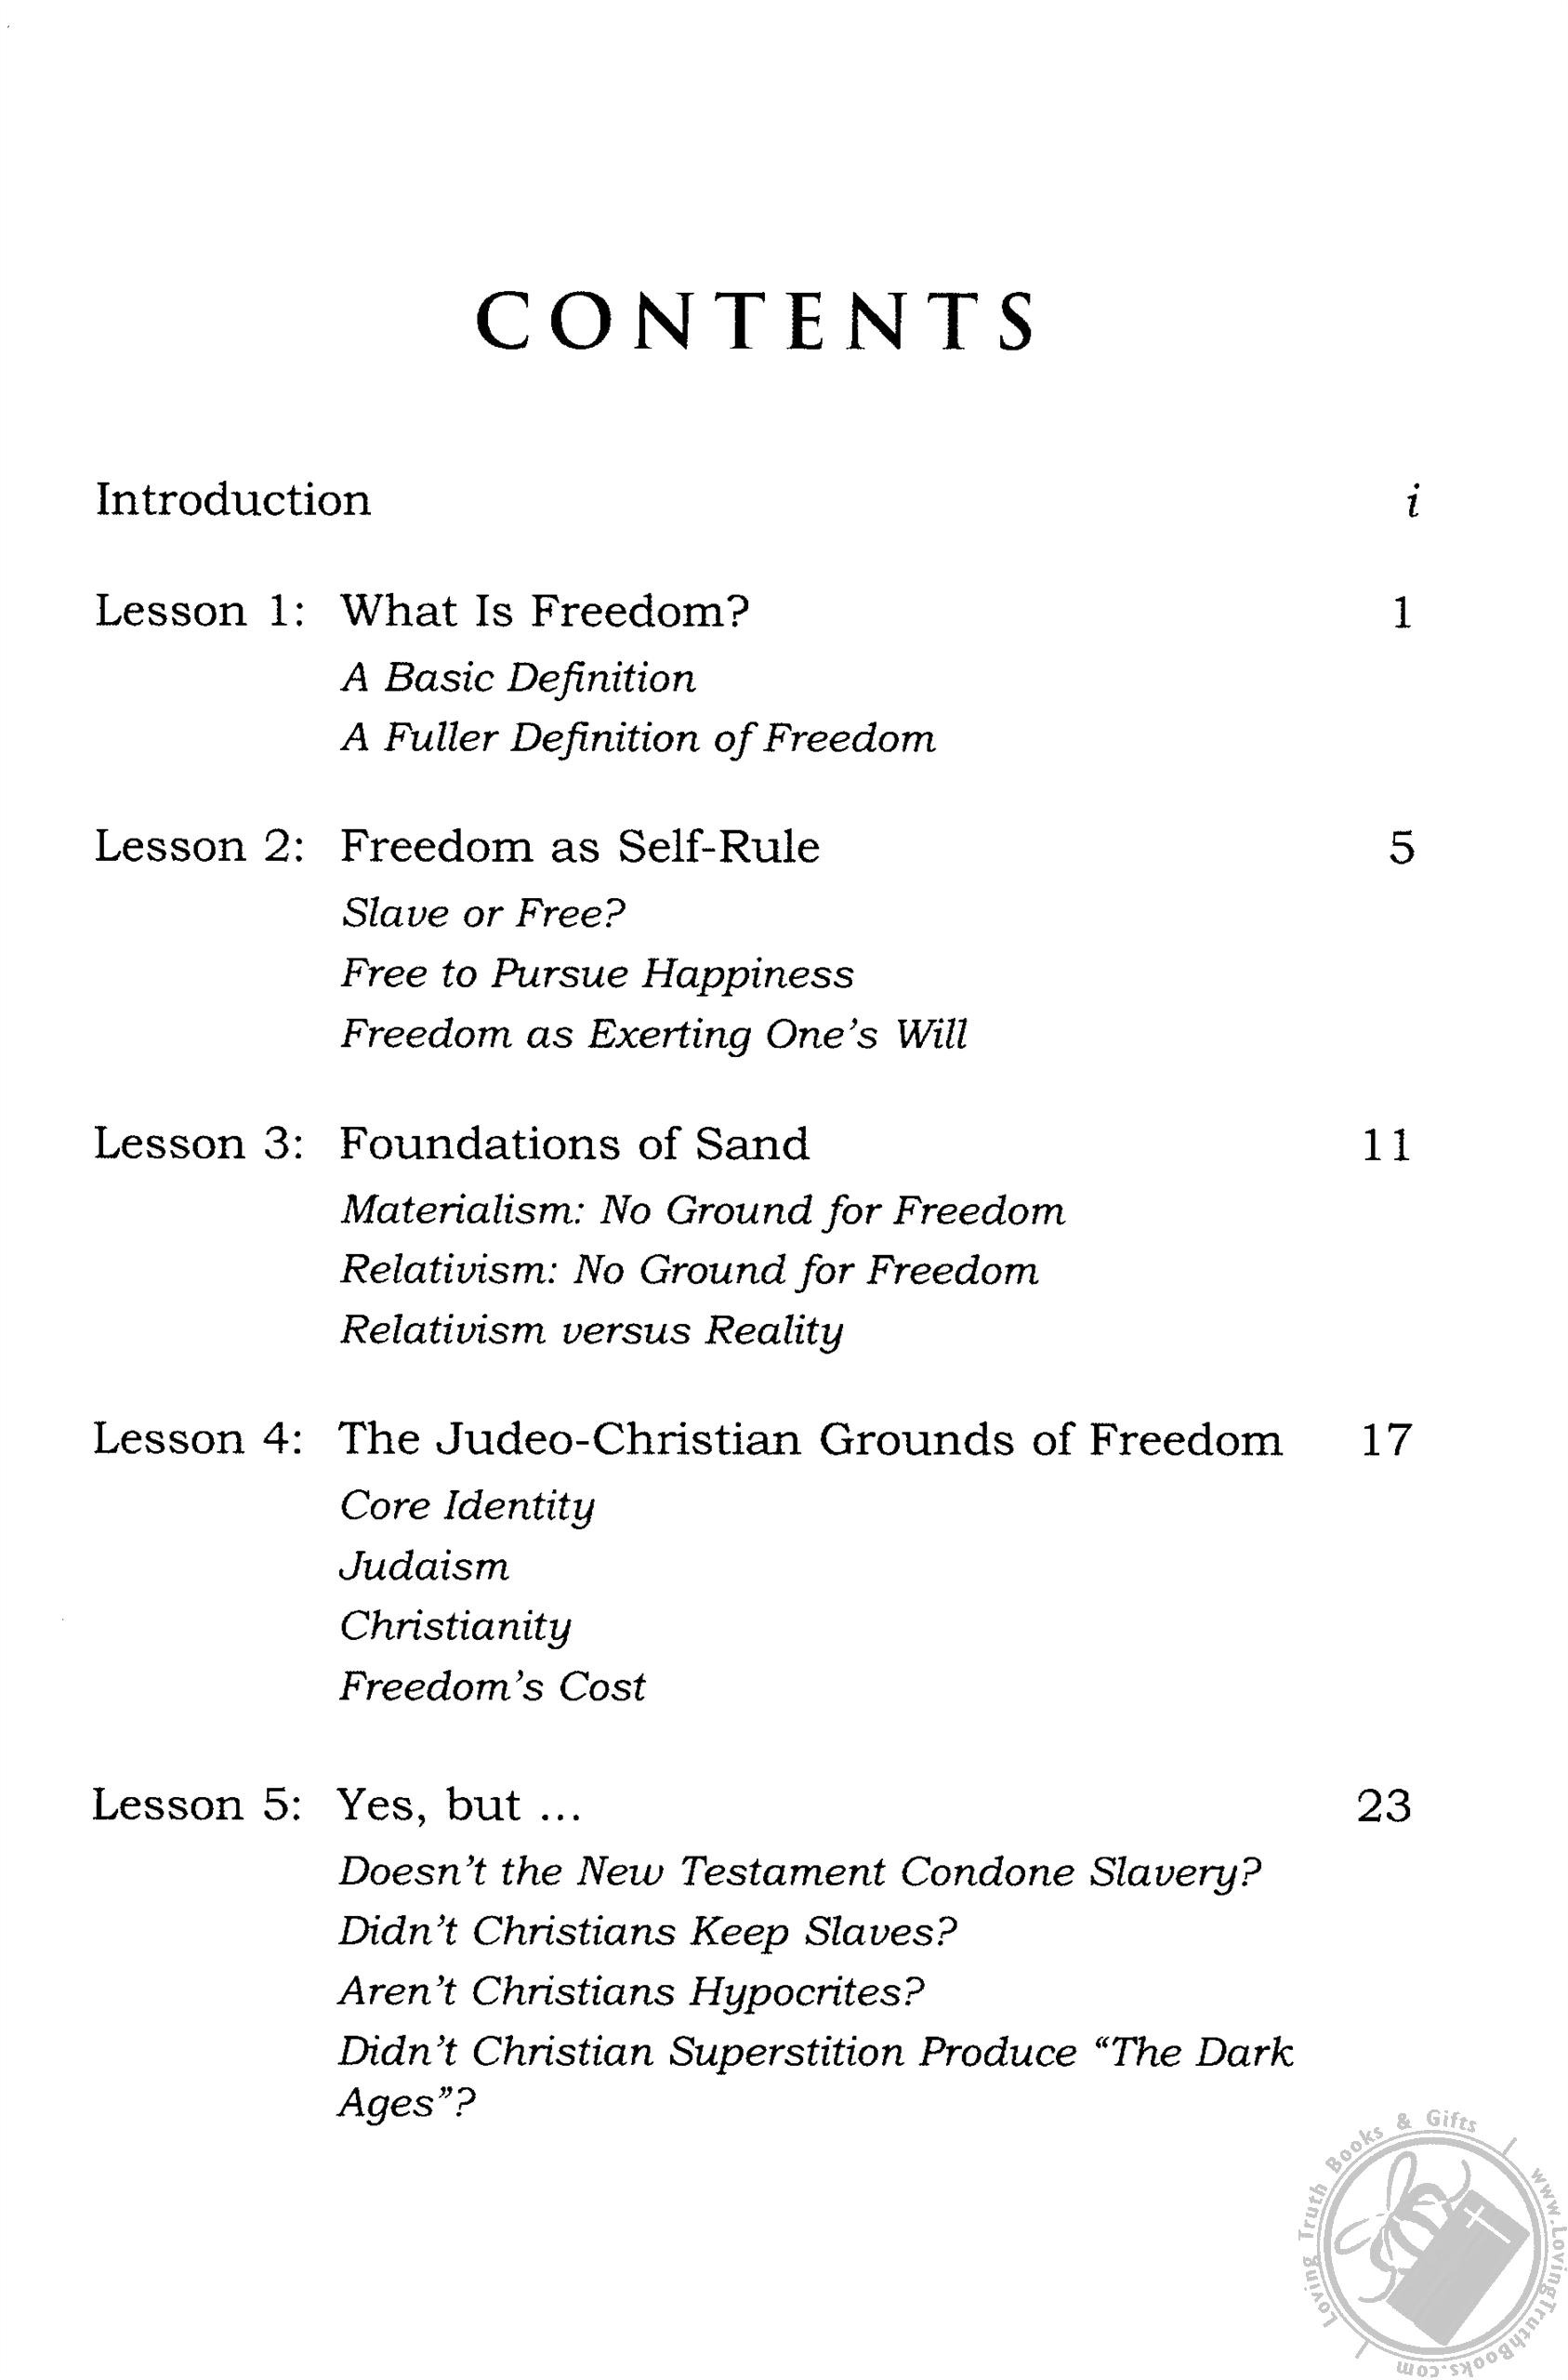 The Birth of Freedom (DVD & Study Guide) by Acton Institute (DVD / Documentary ...